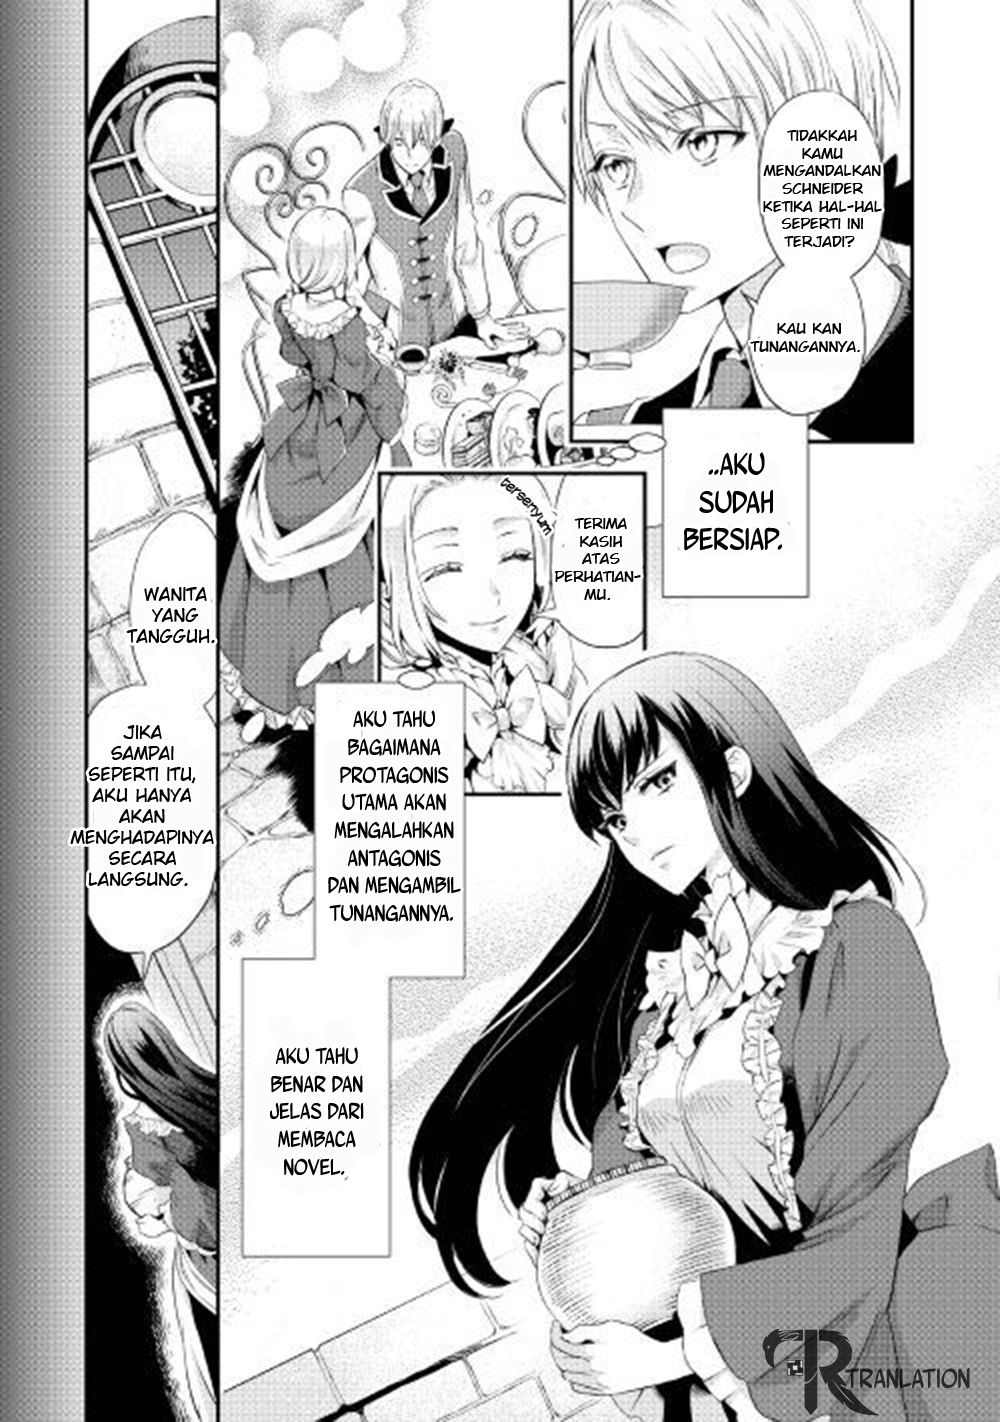 Milady Just Wants to Relax Chapter 01 8